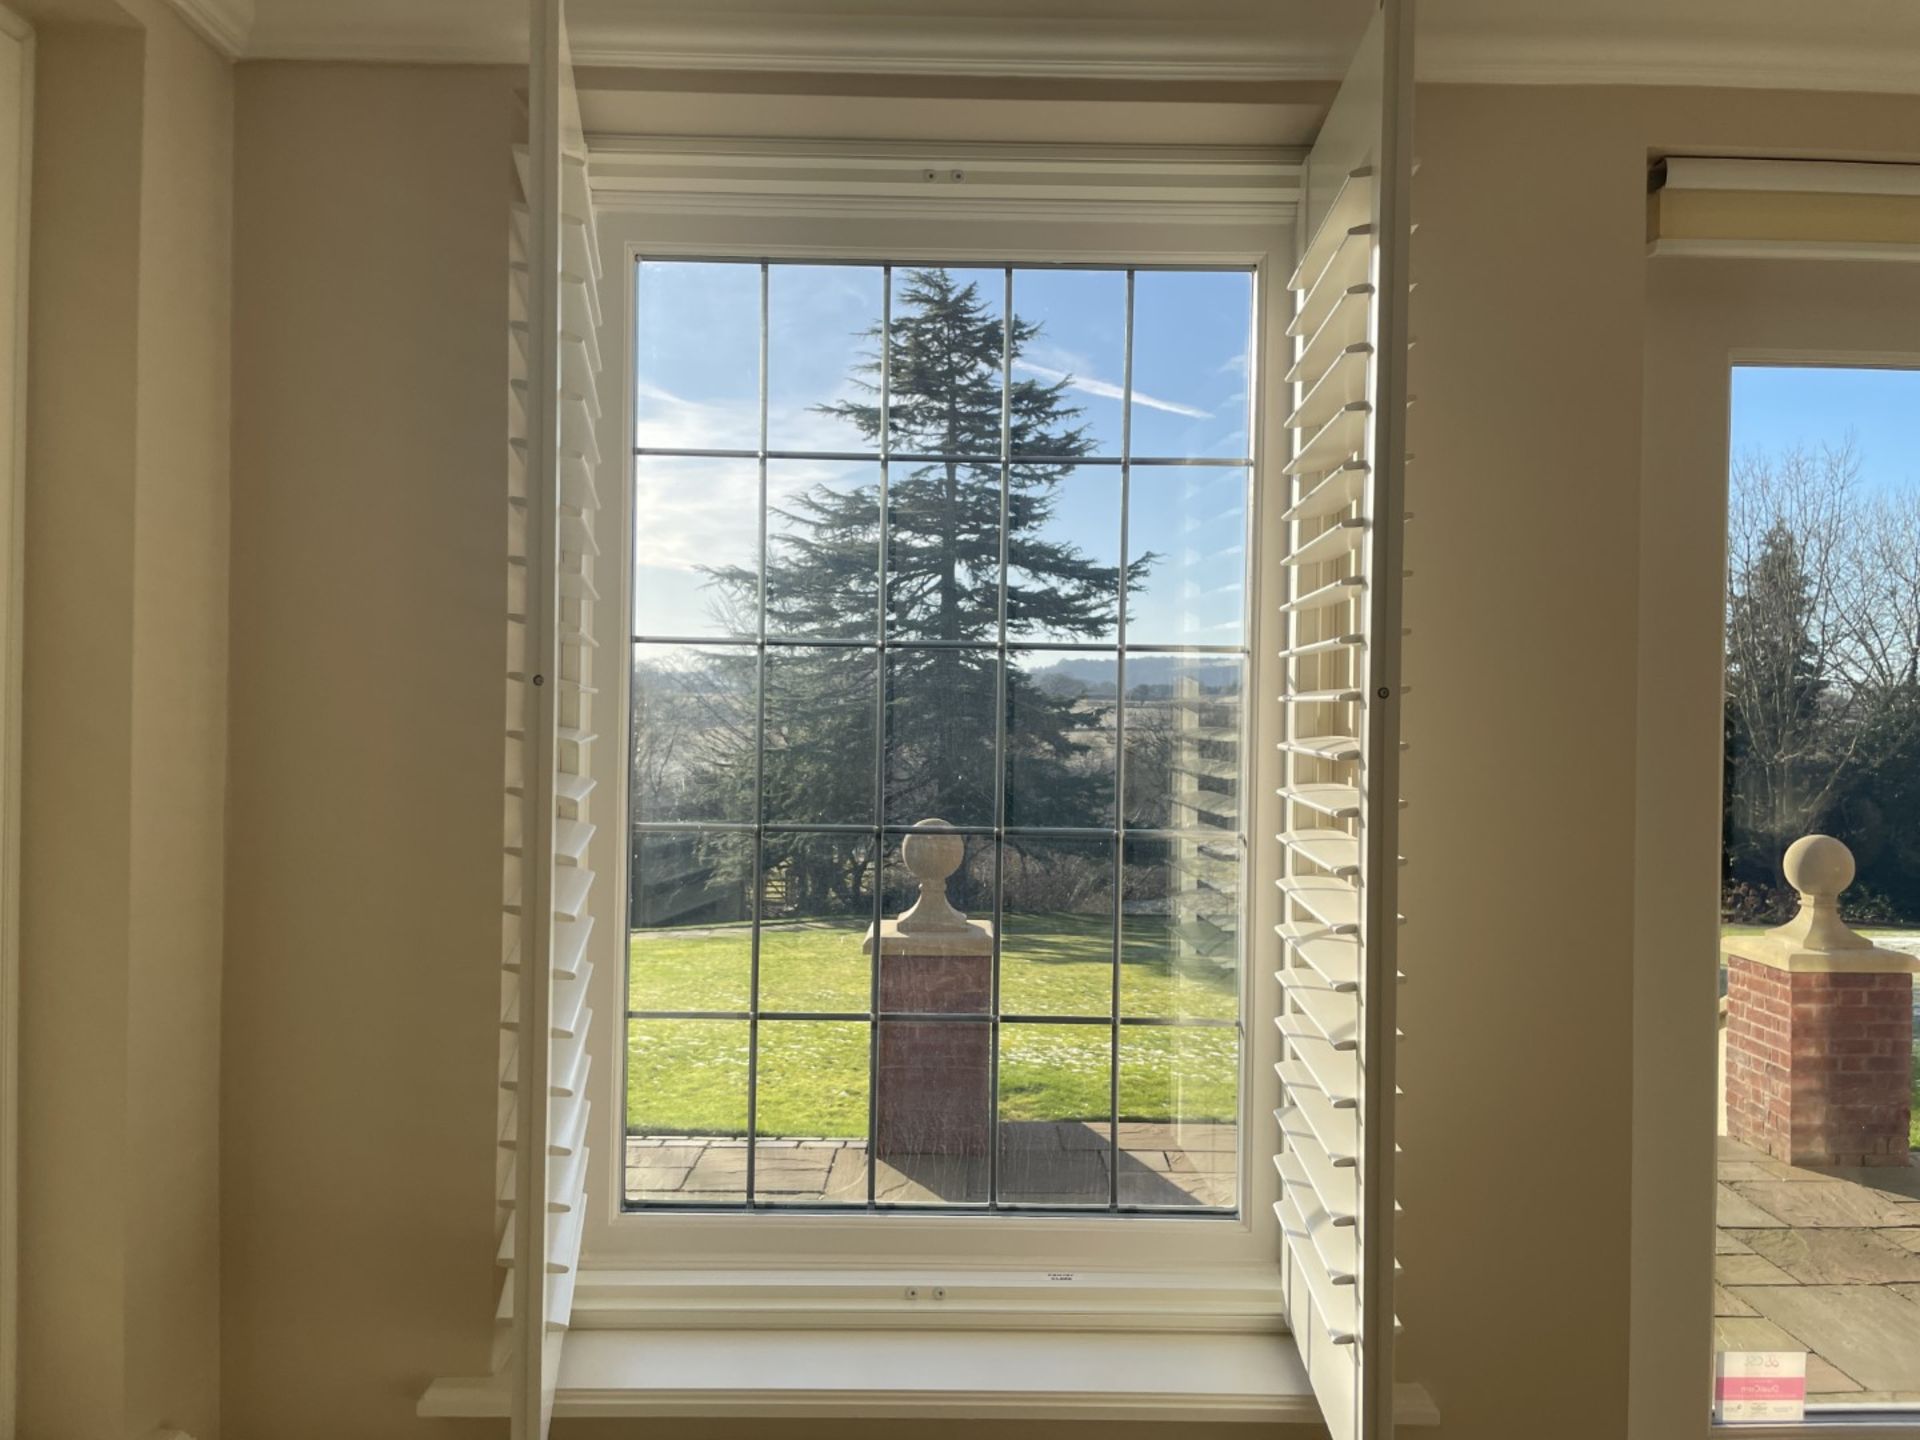 1 x Hardwood Timber Double Glazed Window Frames fitted with Shutter Blinds, In White - Ref: PAN107 - Image 2 of 15